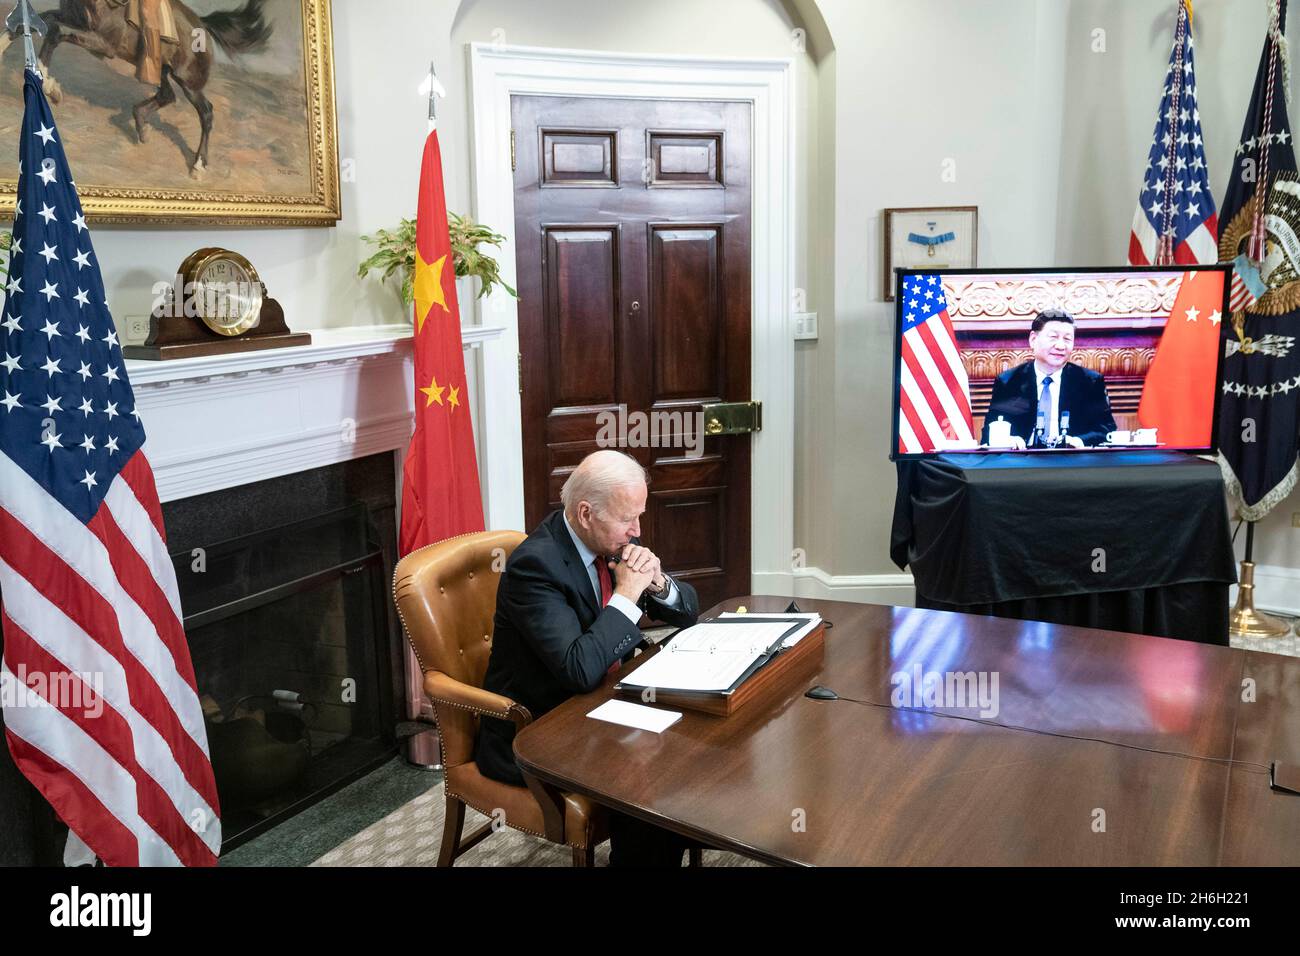 Washington, United States. 15th Nov, 2021. President Joe Biden listens during a virtual summit with Chinese President Xi Jinping in the Roosevelt Room of the White House in Washington DC on Monday, November 15, 2021. Photo by Sarah Silbiger/Pool/Sipa USA Credit: Sipa USA/Alamy Live News Stock Photo